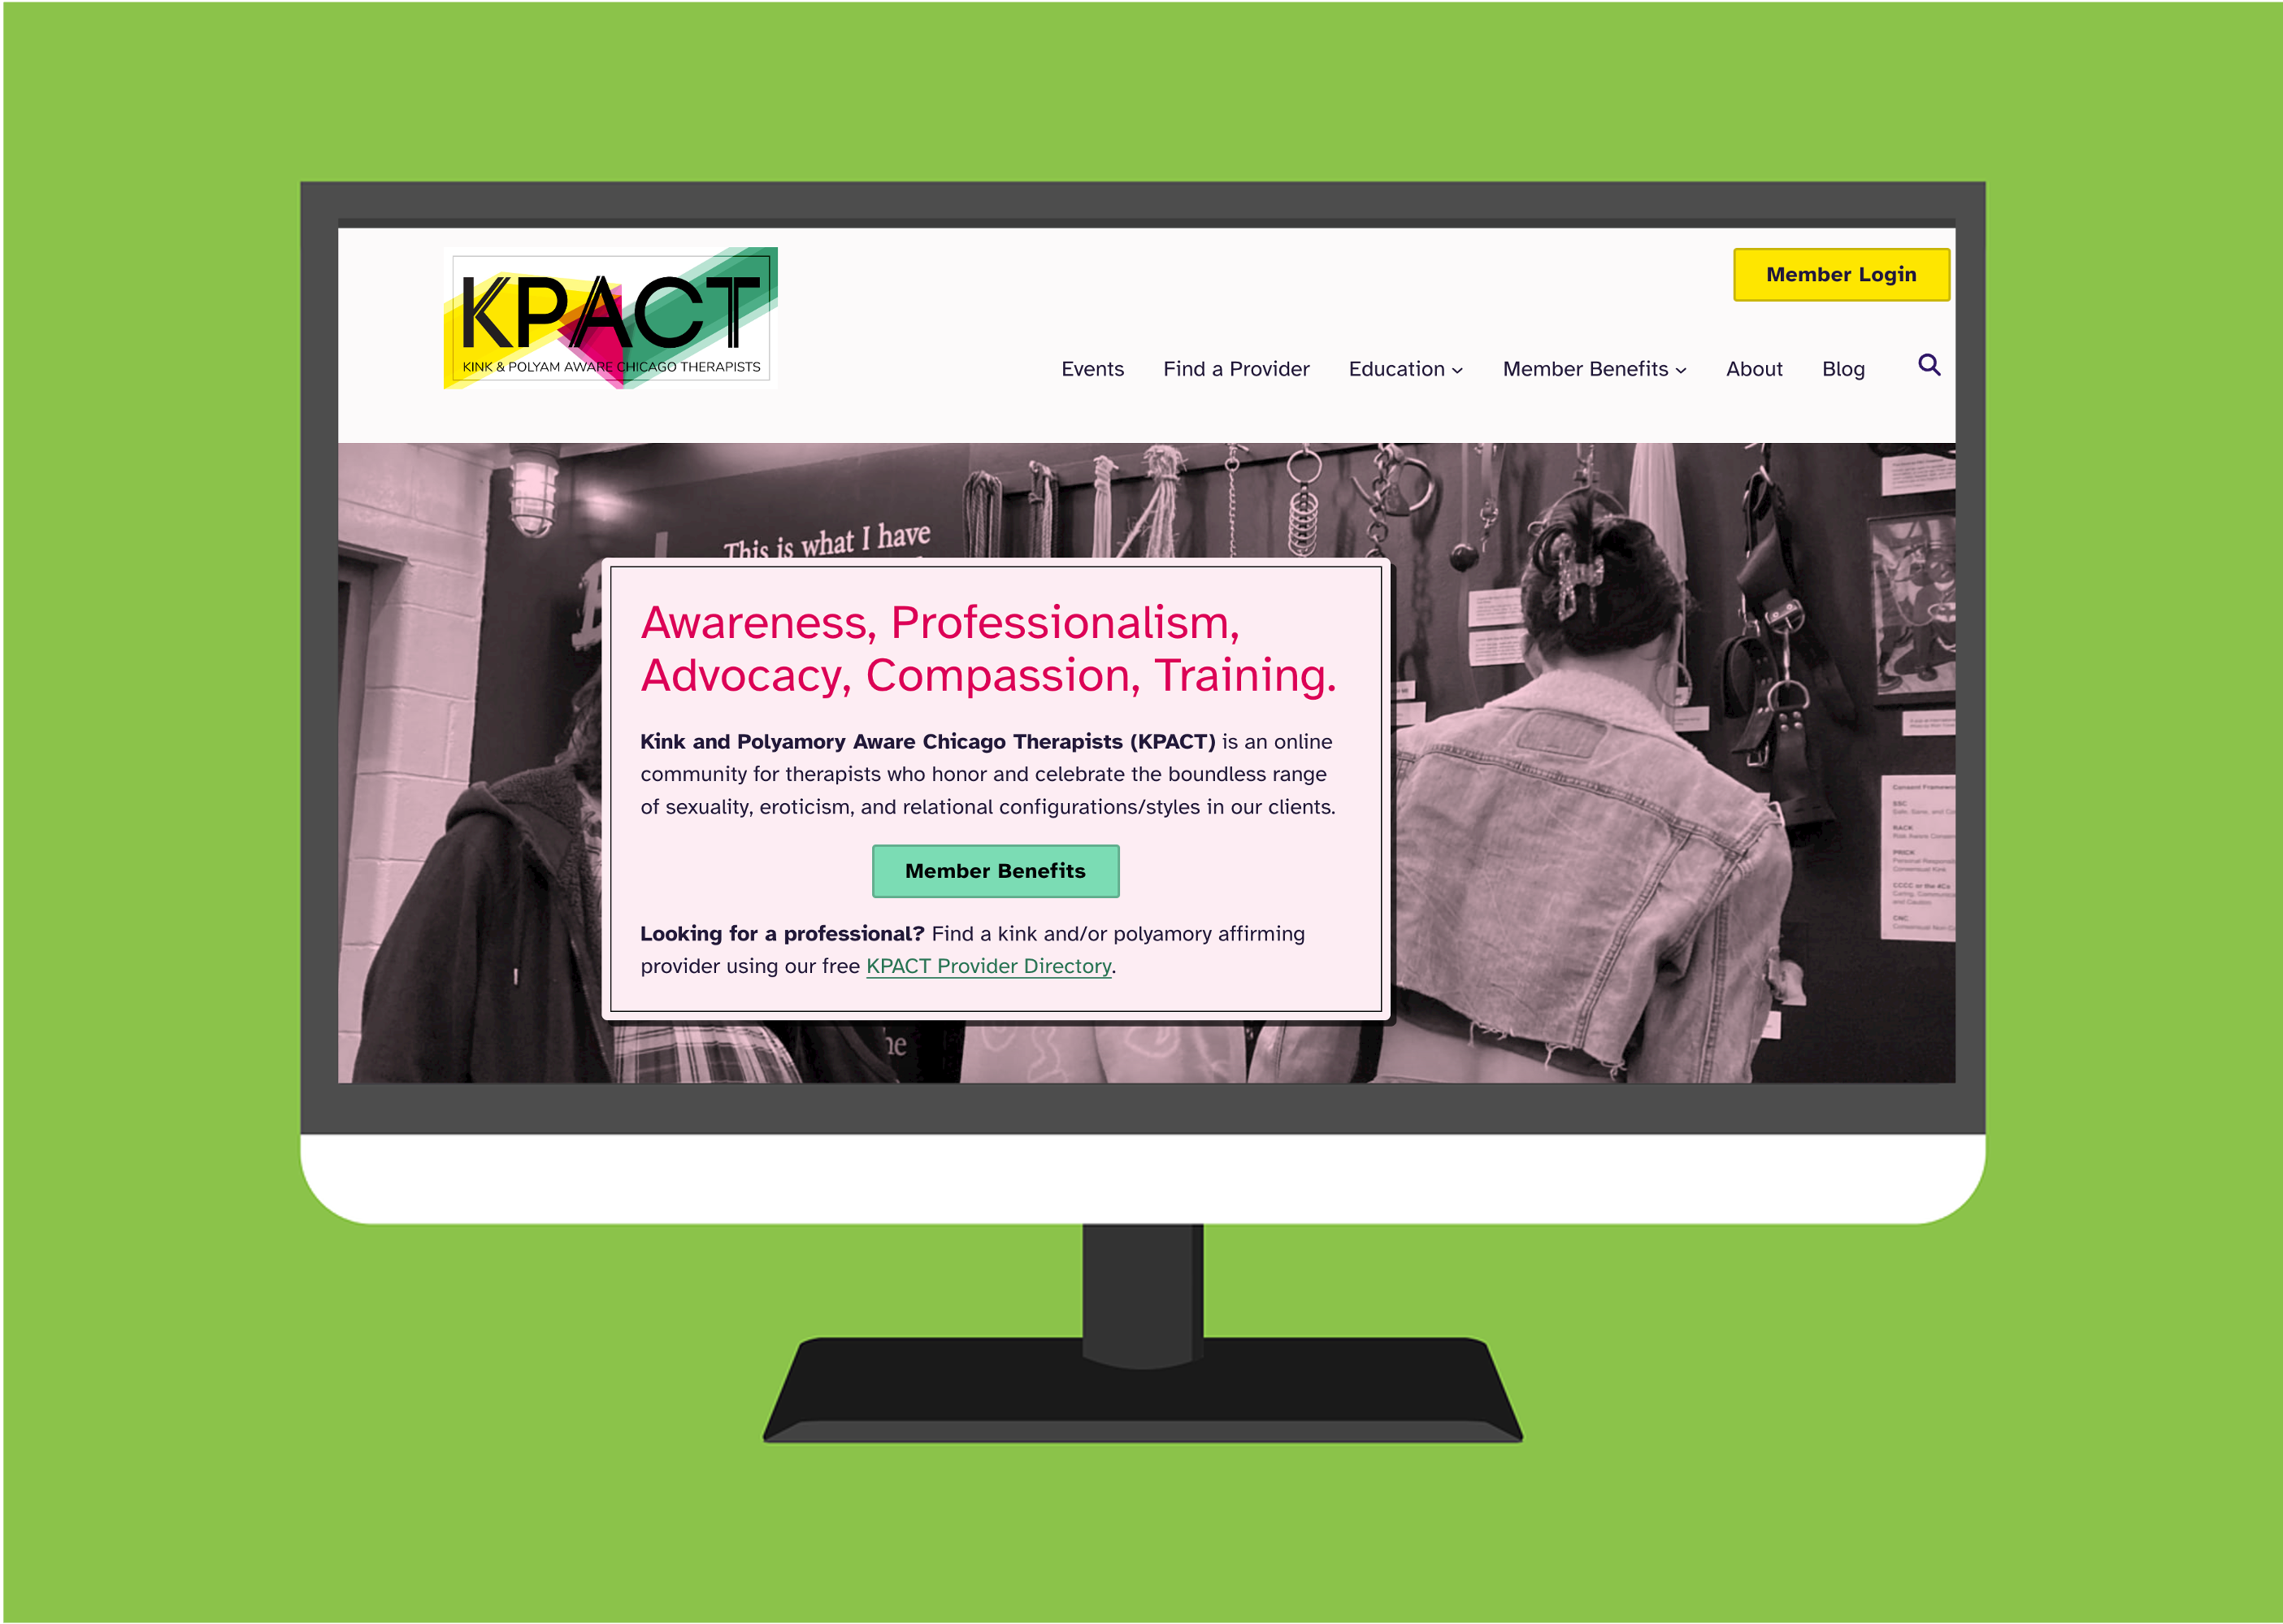 Introducing KPACT’s New Multi-Professional Directory